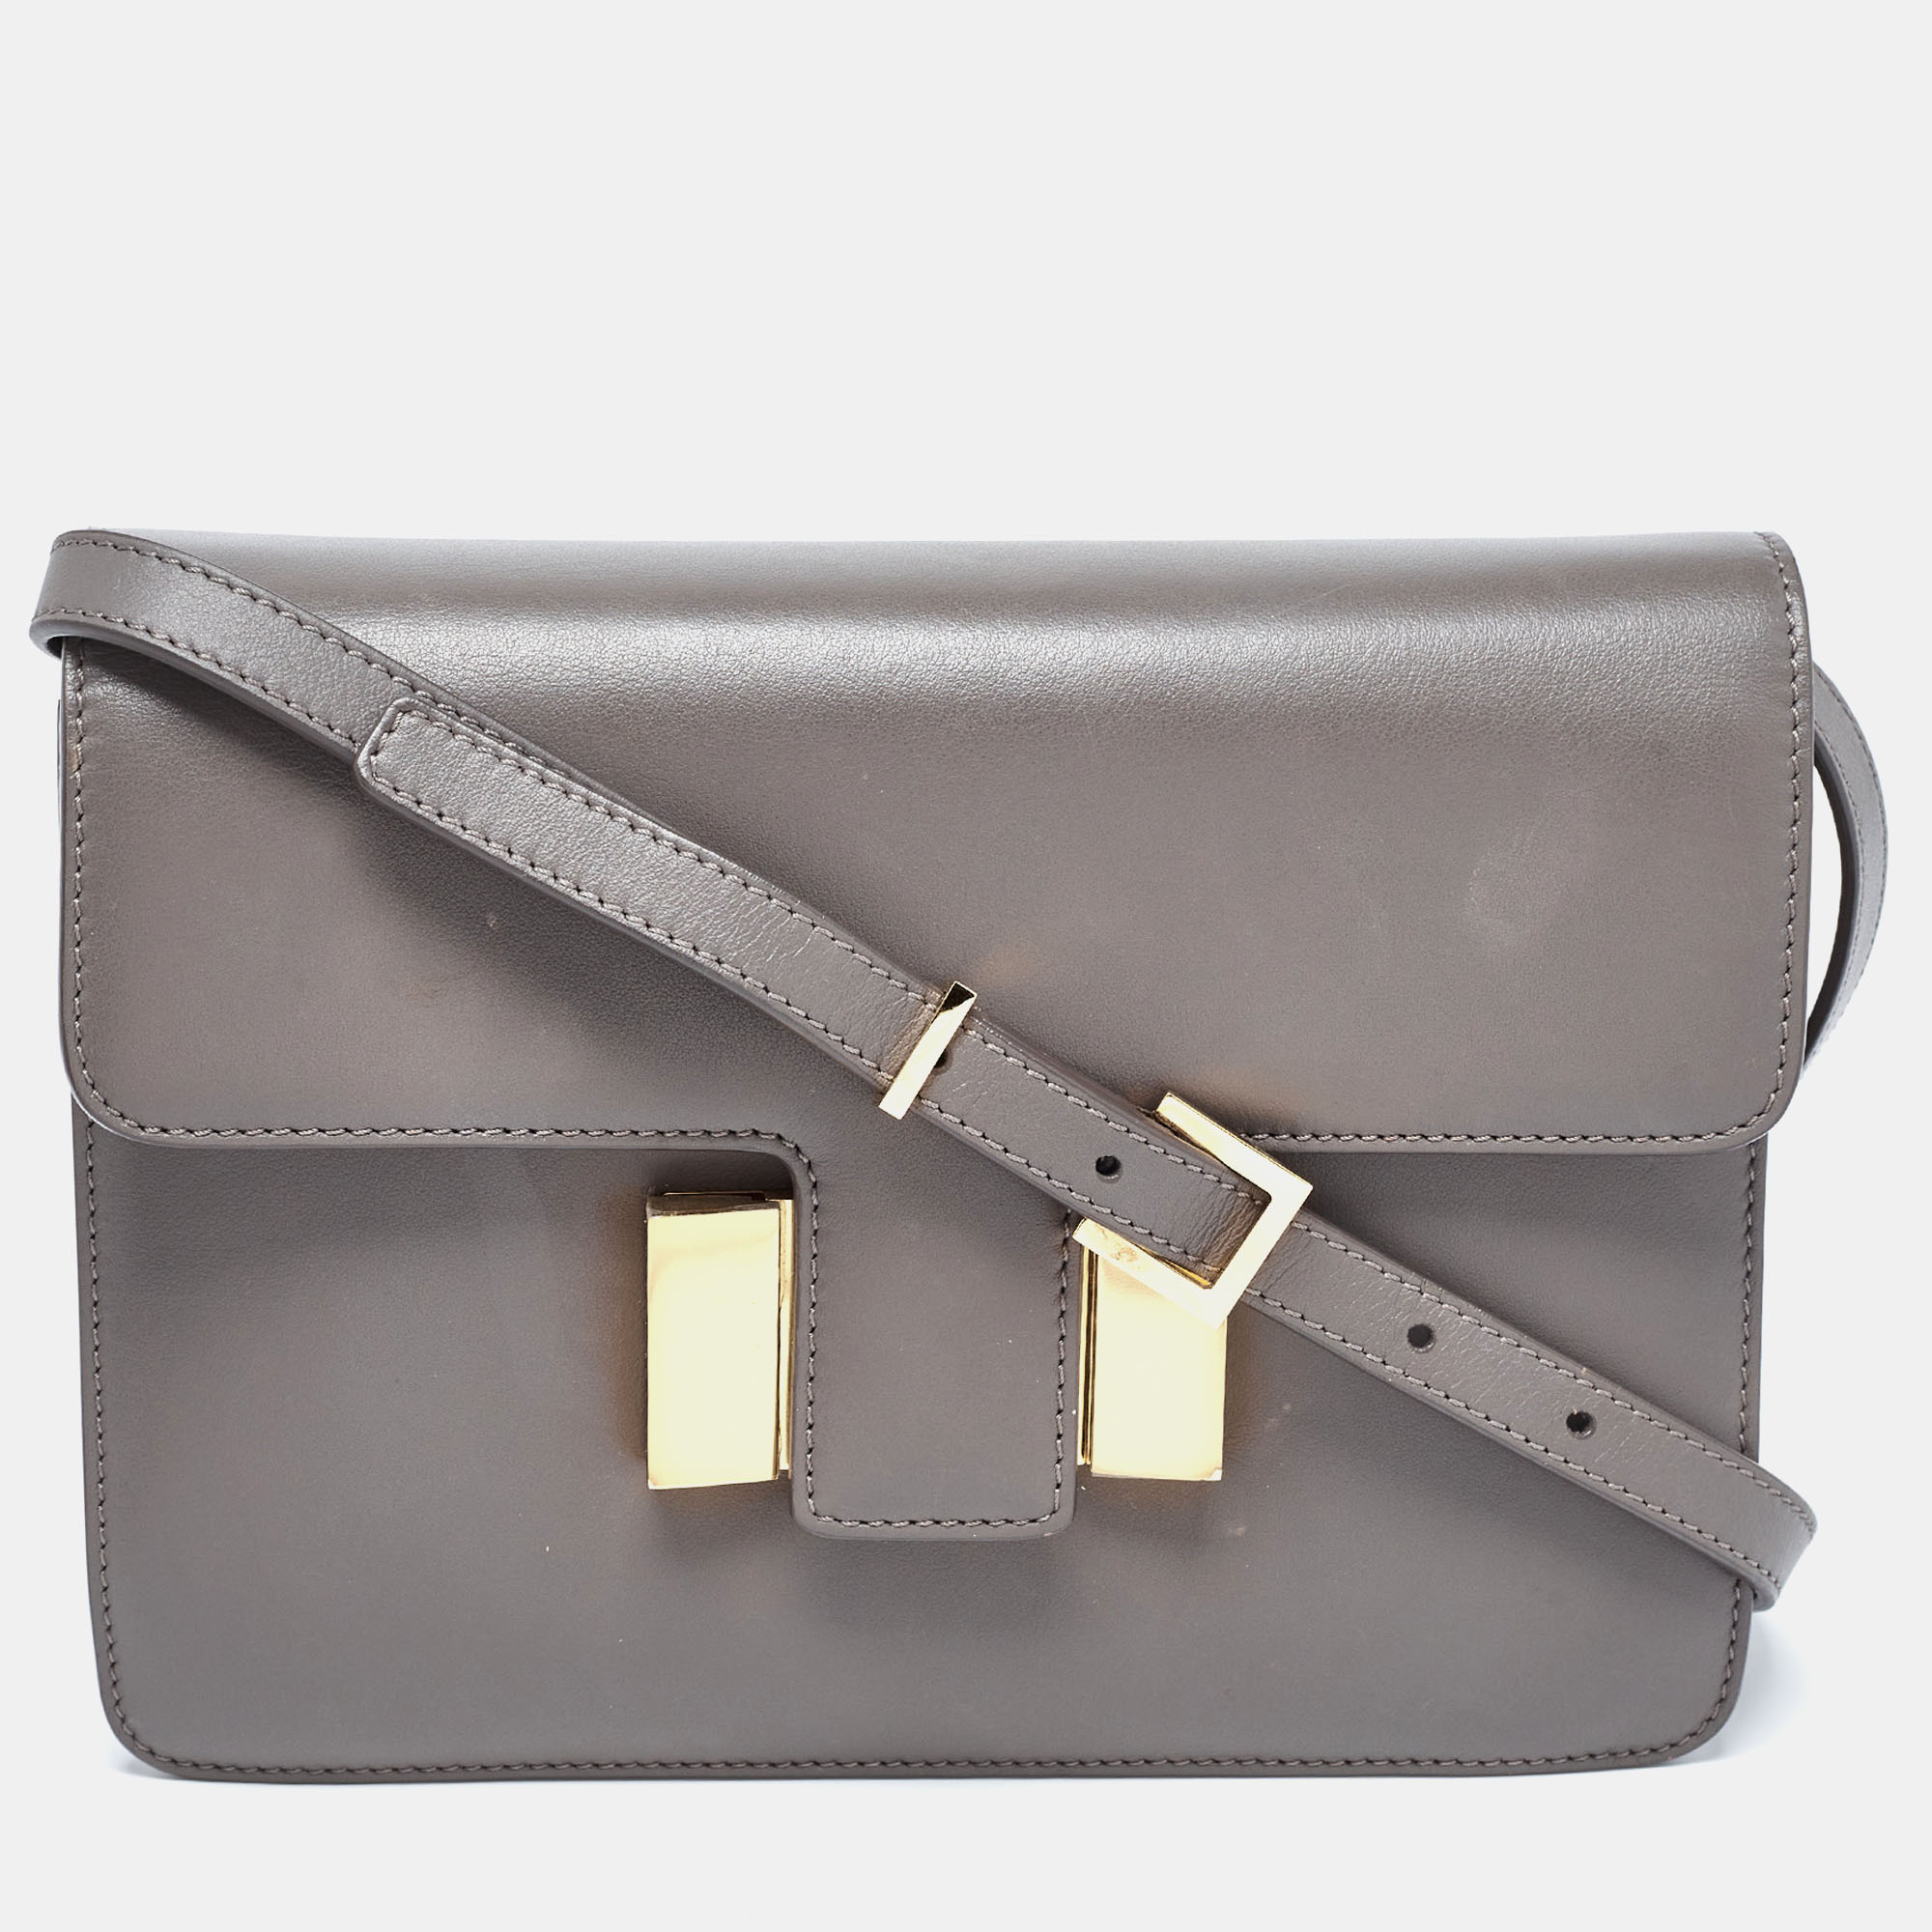 The Sienna shoulder bag from Tom Ford is fabulously built and extremely alluring in terms of design. Meticulously crafted with leather on the exterior this bag renders a unique look as you carry it. The frontal flap opens up a well sized leather interior which grants ample space. Upgrade your style as you step out with this stunning bag.